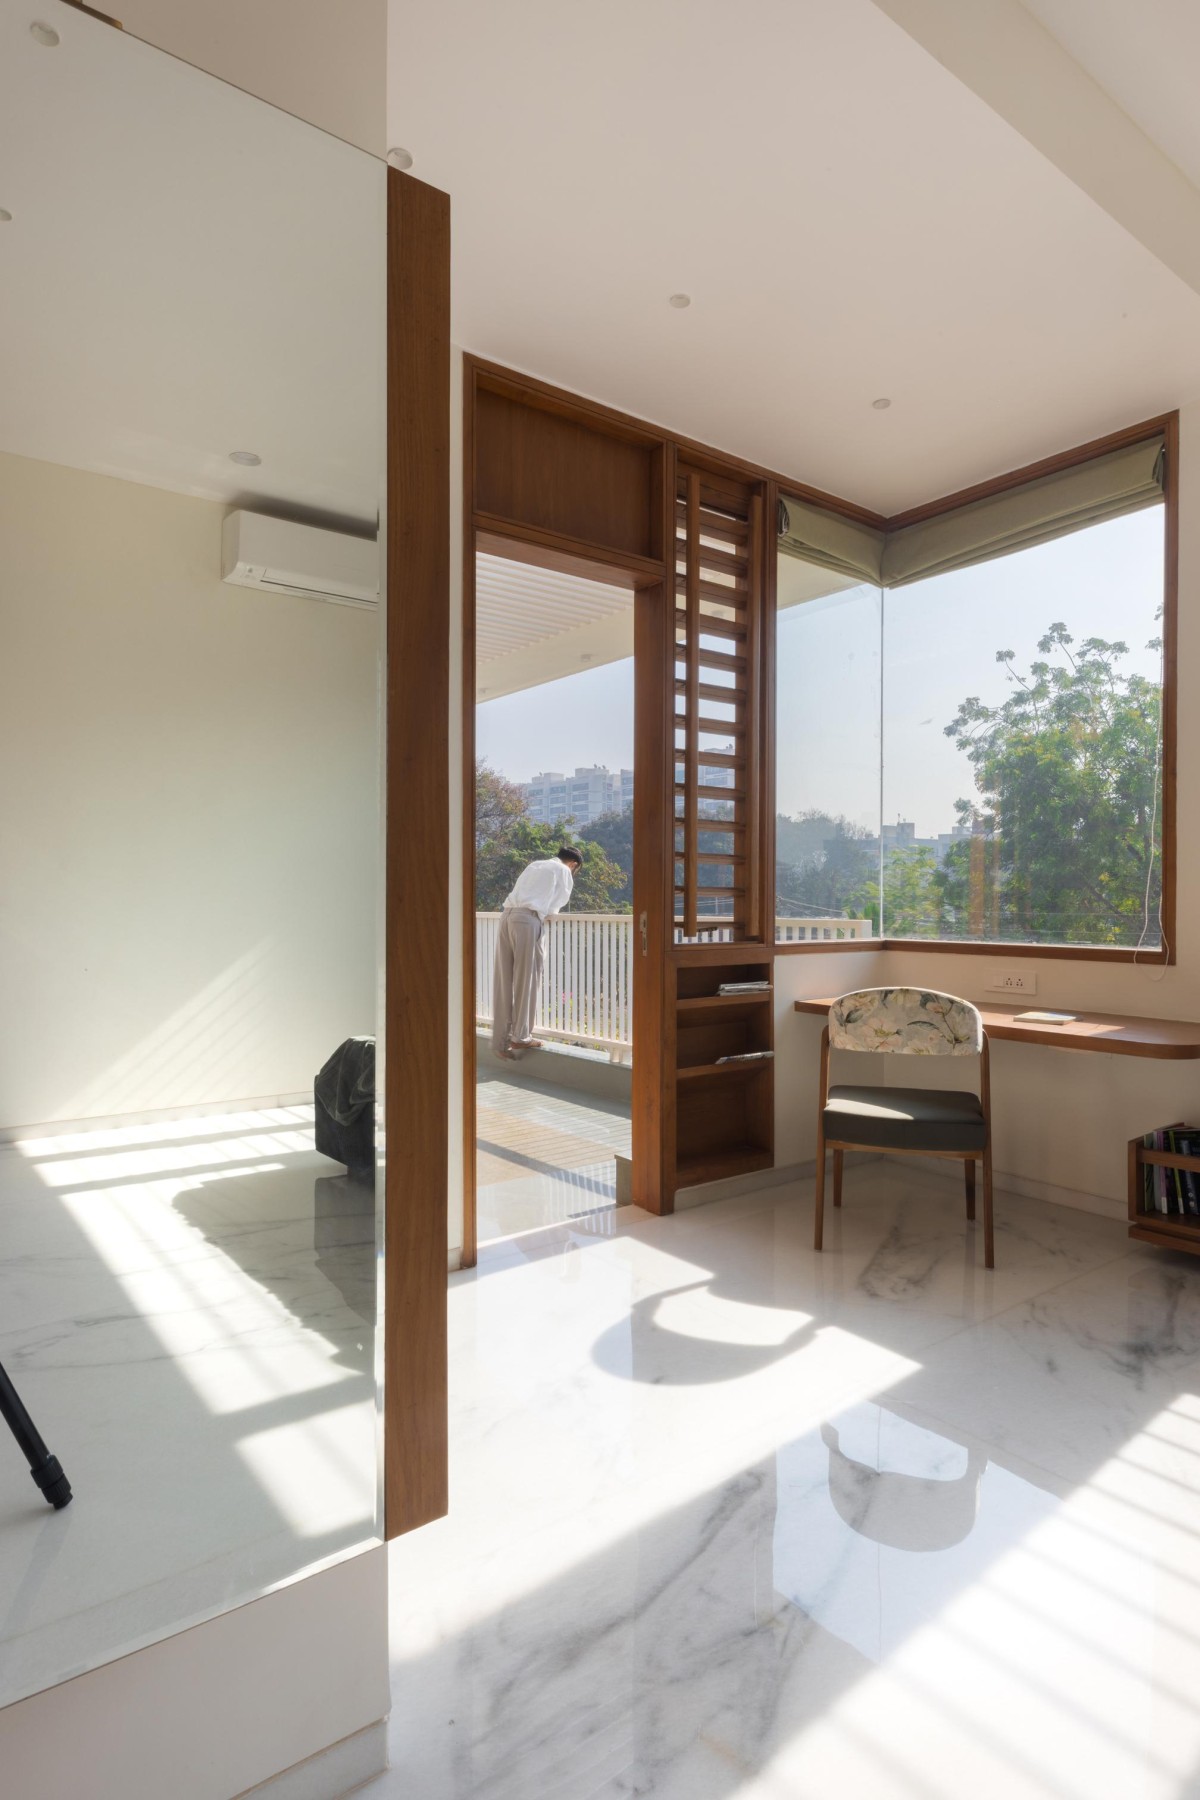 Bedroom to Terrace of HVR by 540X Partners